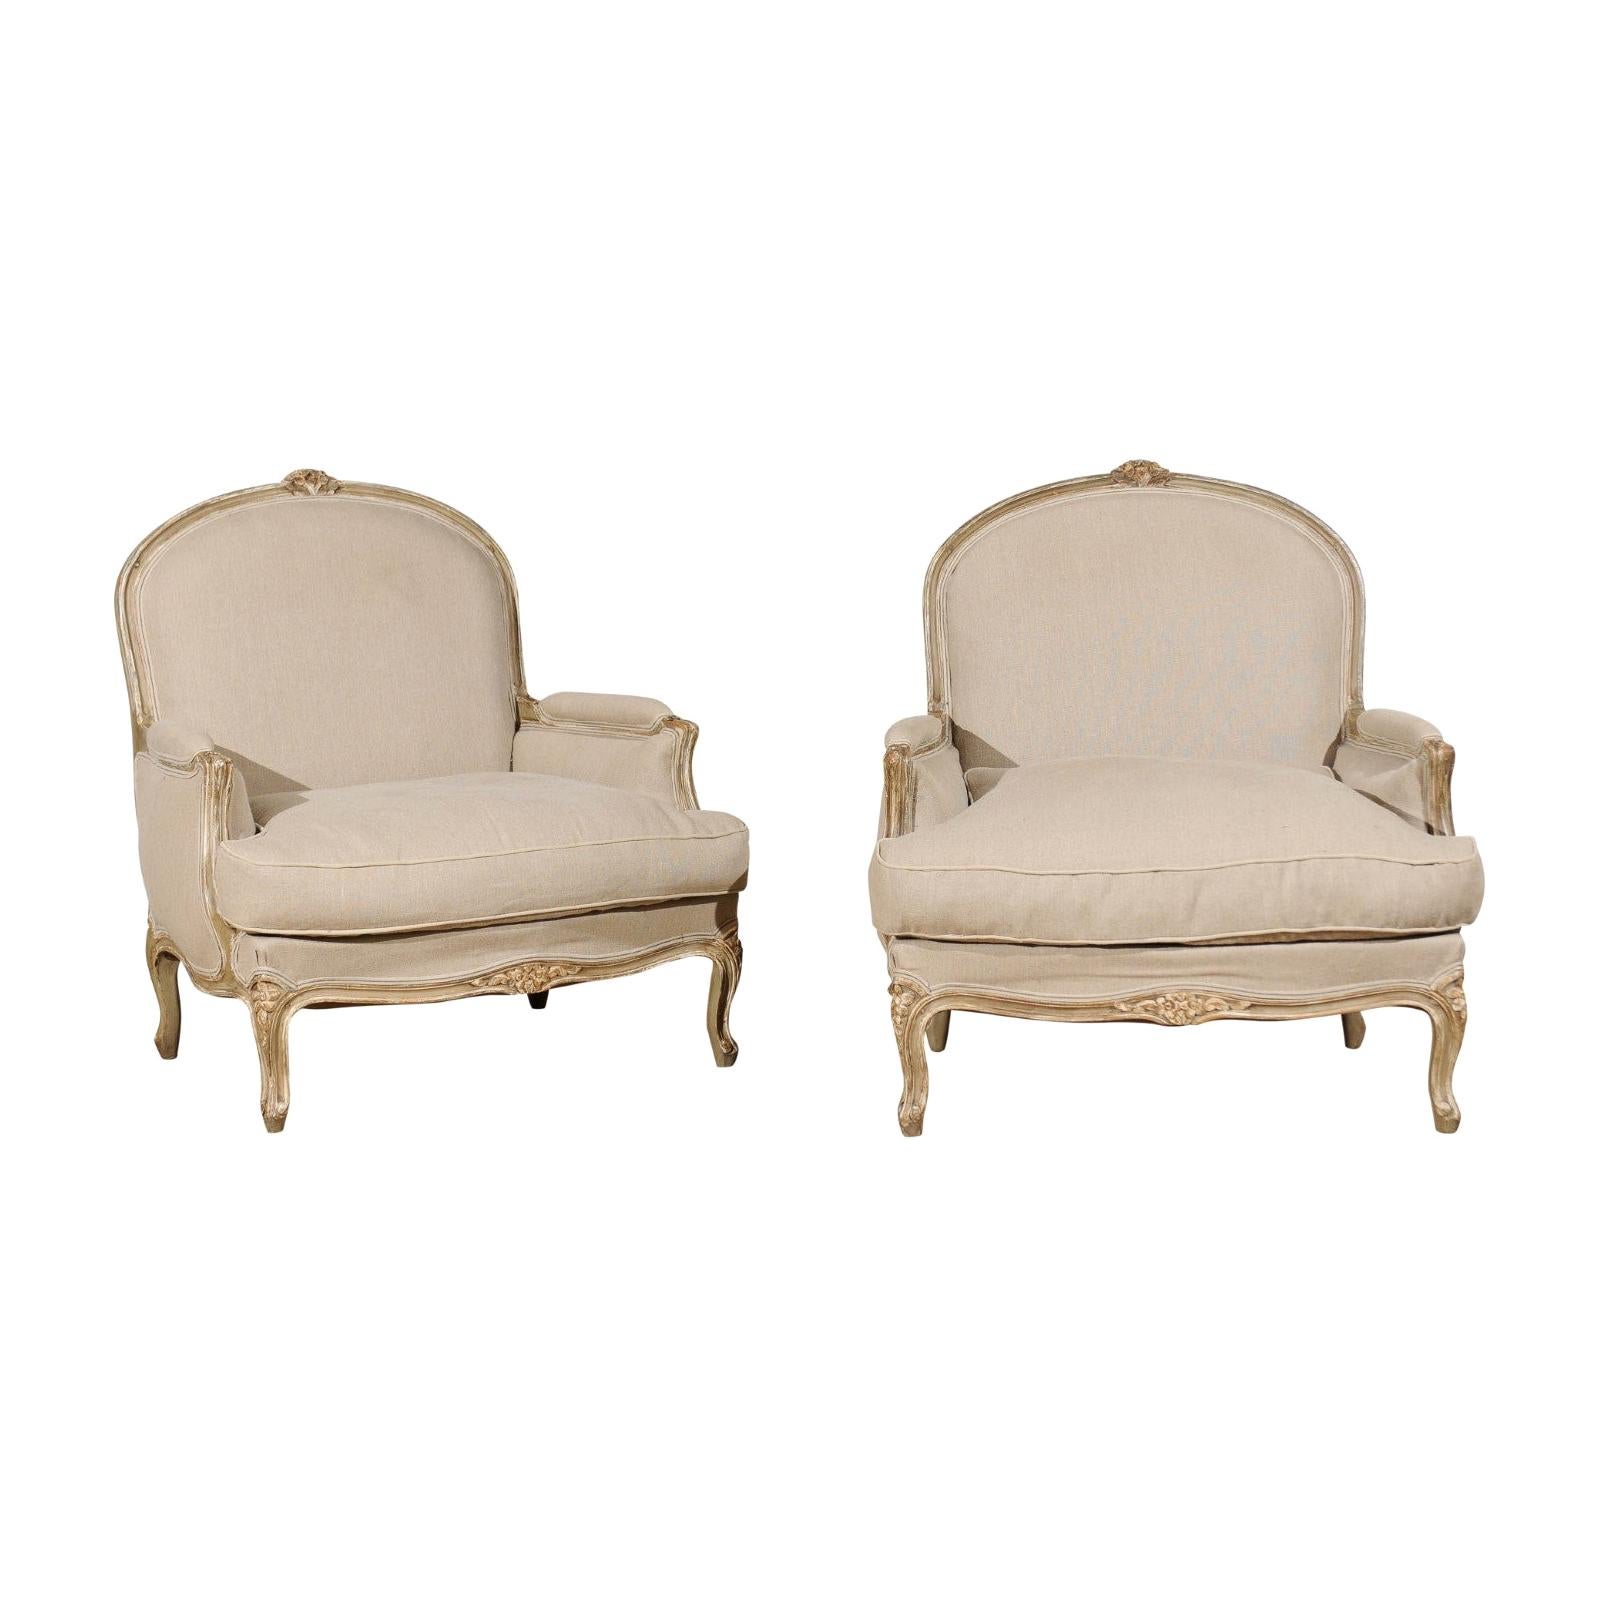 Pair of French Louis XV Style 19th Century Marquises Chairs with Upholstery